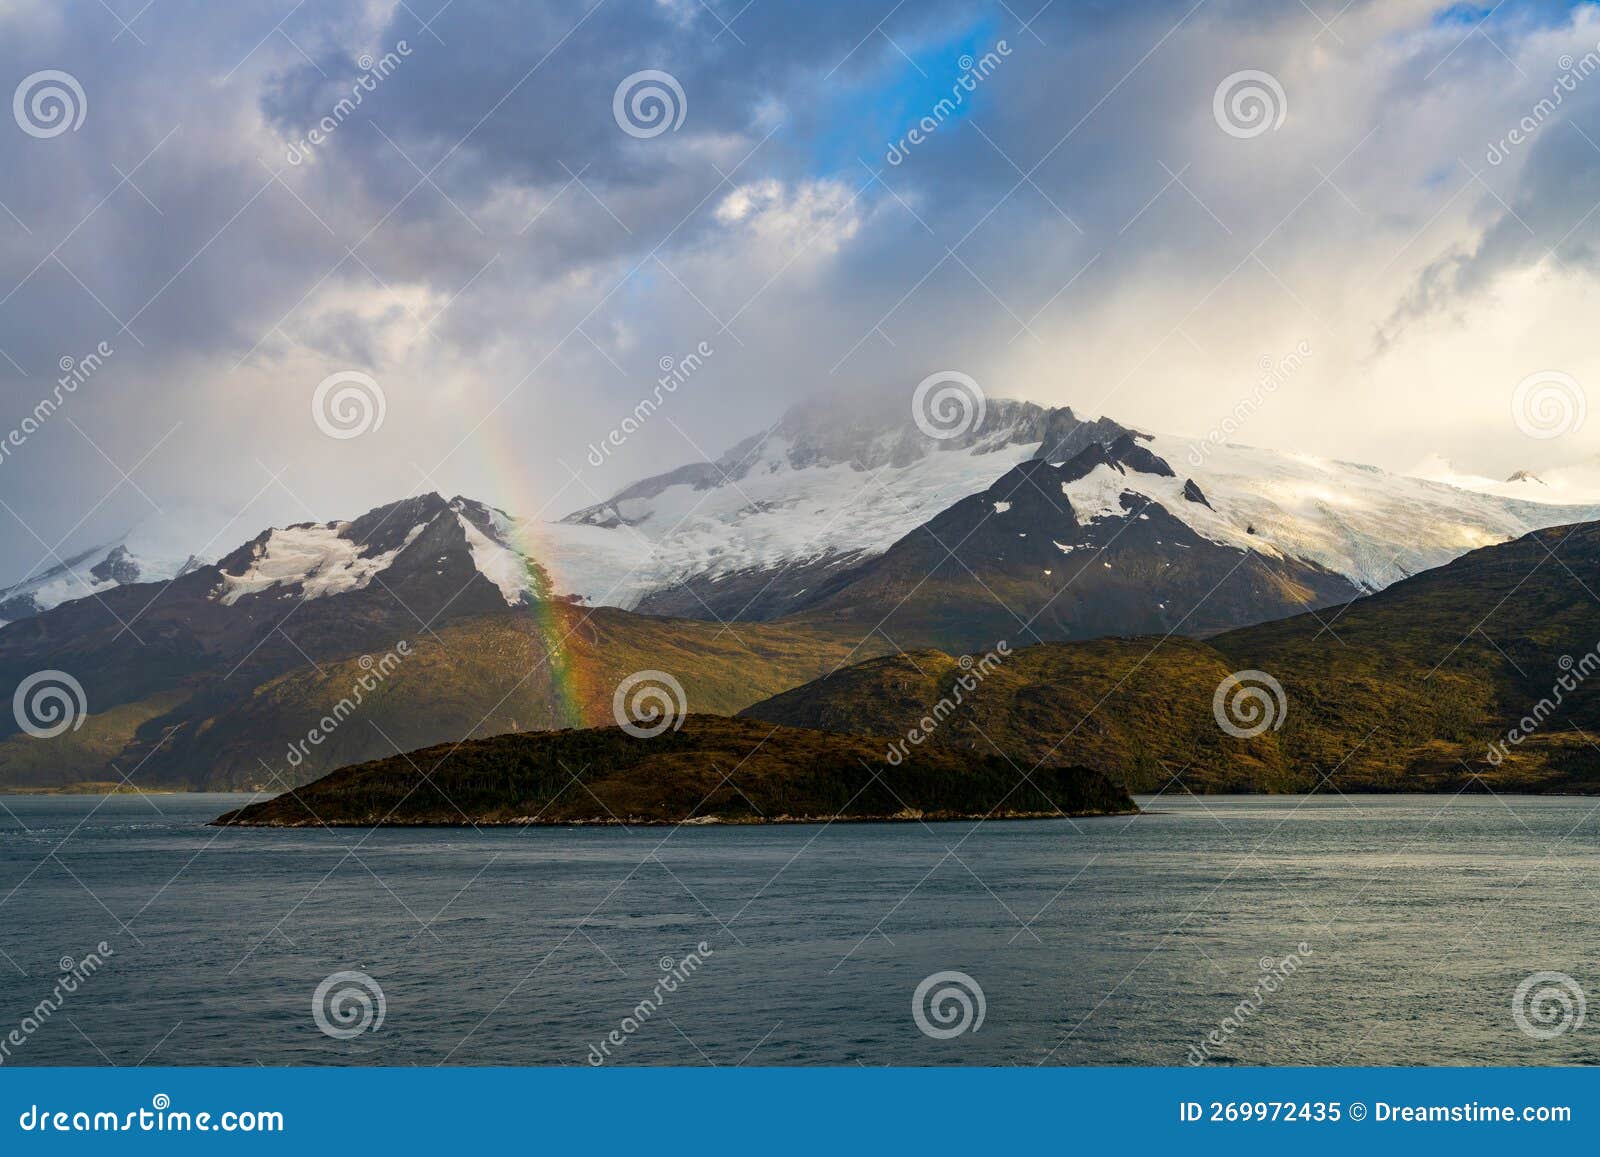 panorama of holanda glacier by beagle channel with rainbow